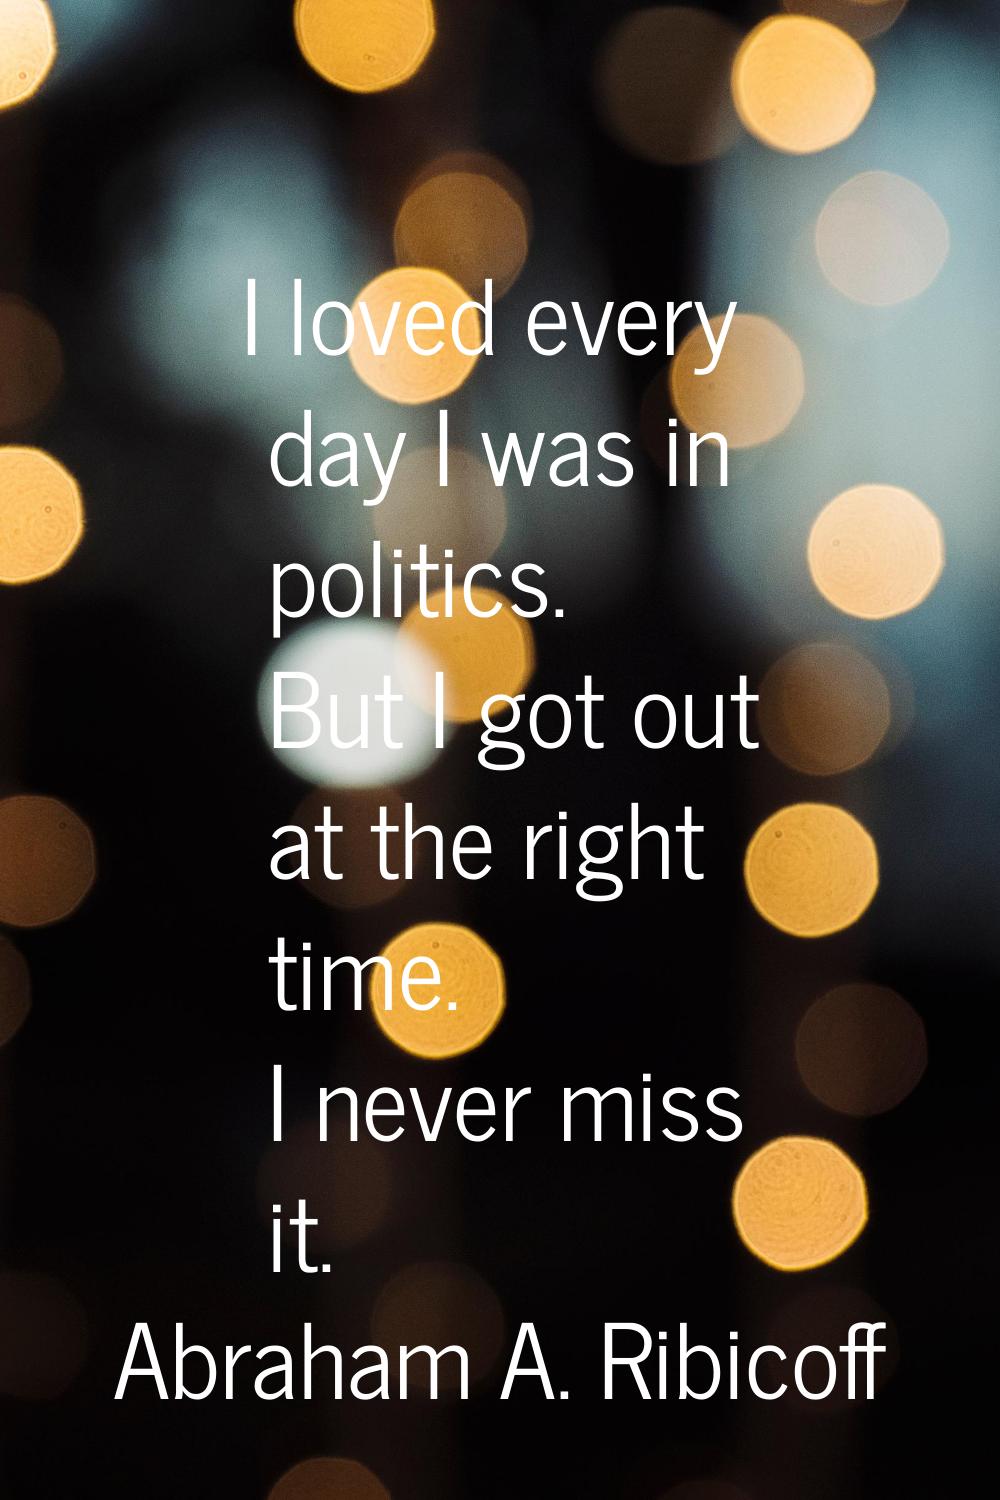 I loved every day I was in politics. But I got out at the right time. I never miss it.